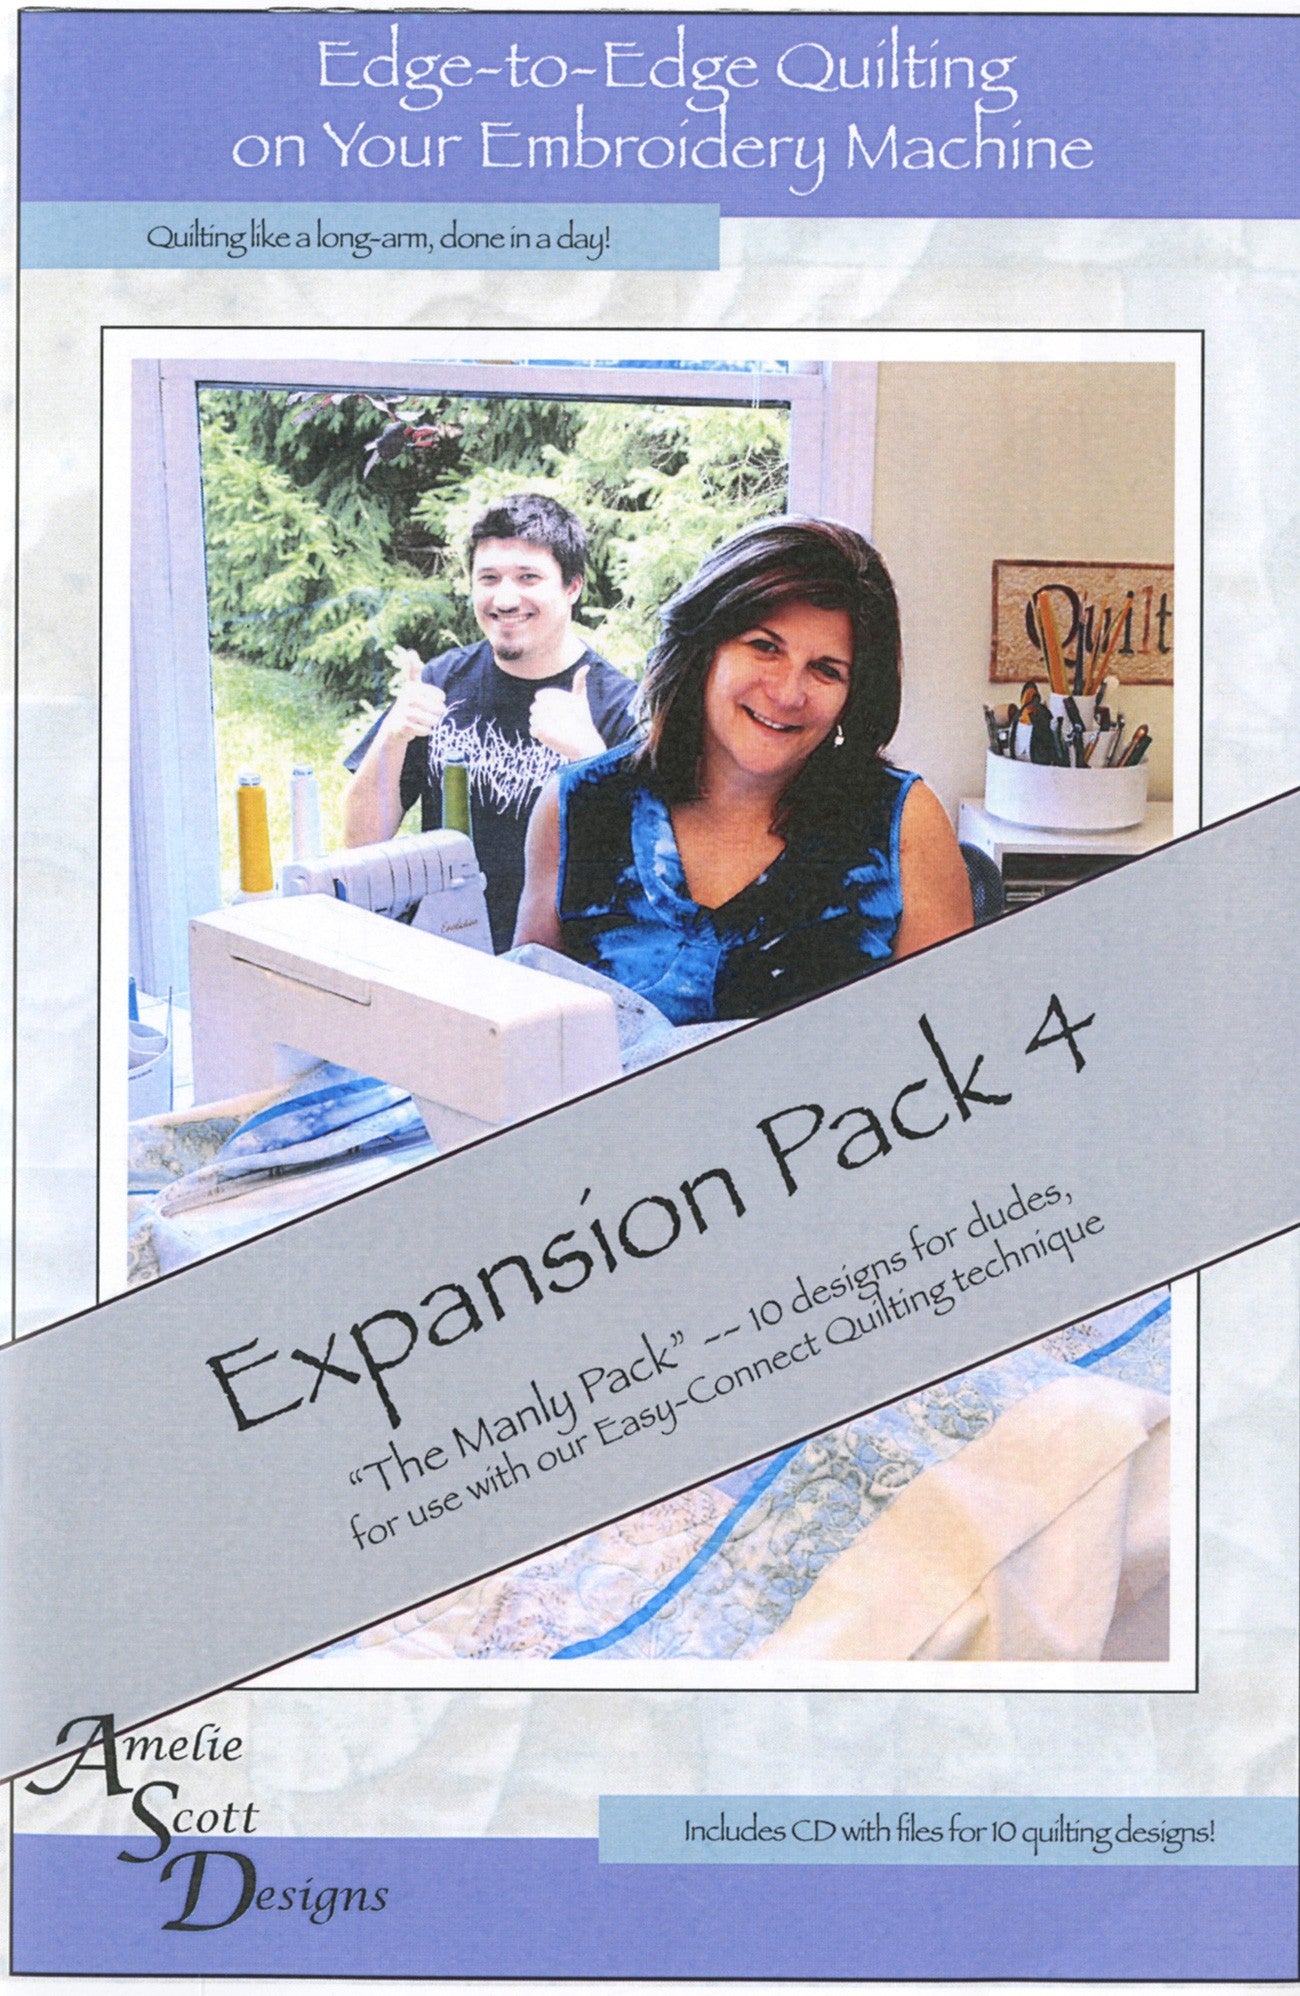 Edge-To-Edge Quilting On Your Embroidery Machine Expansion Pack 4 by Amelie Scott Designs